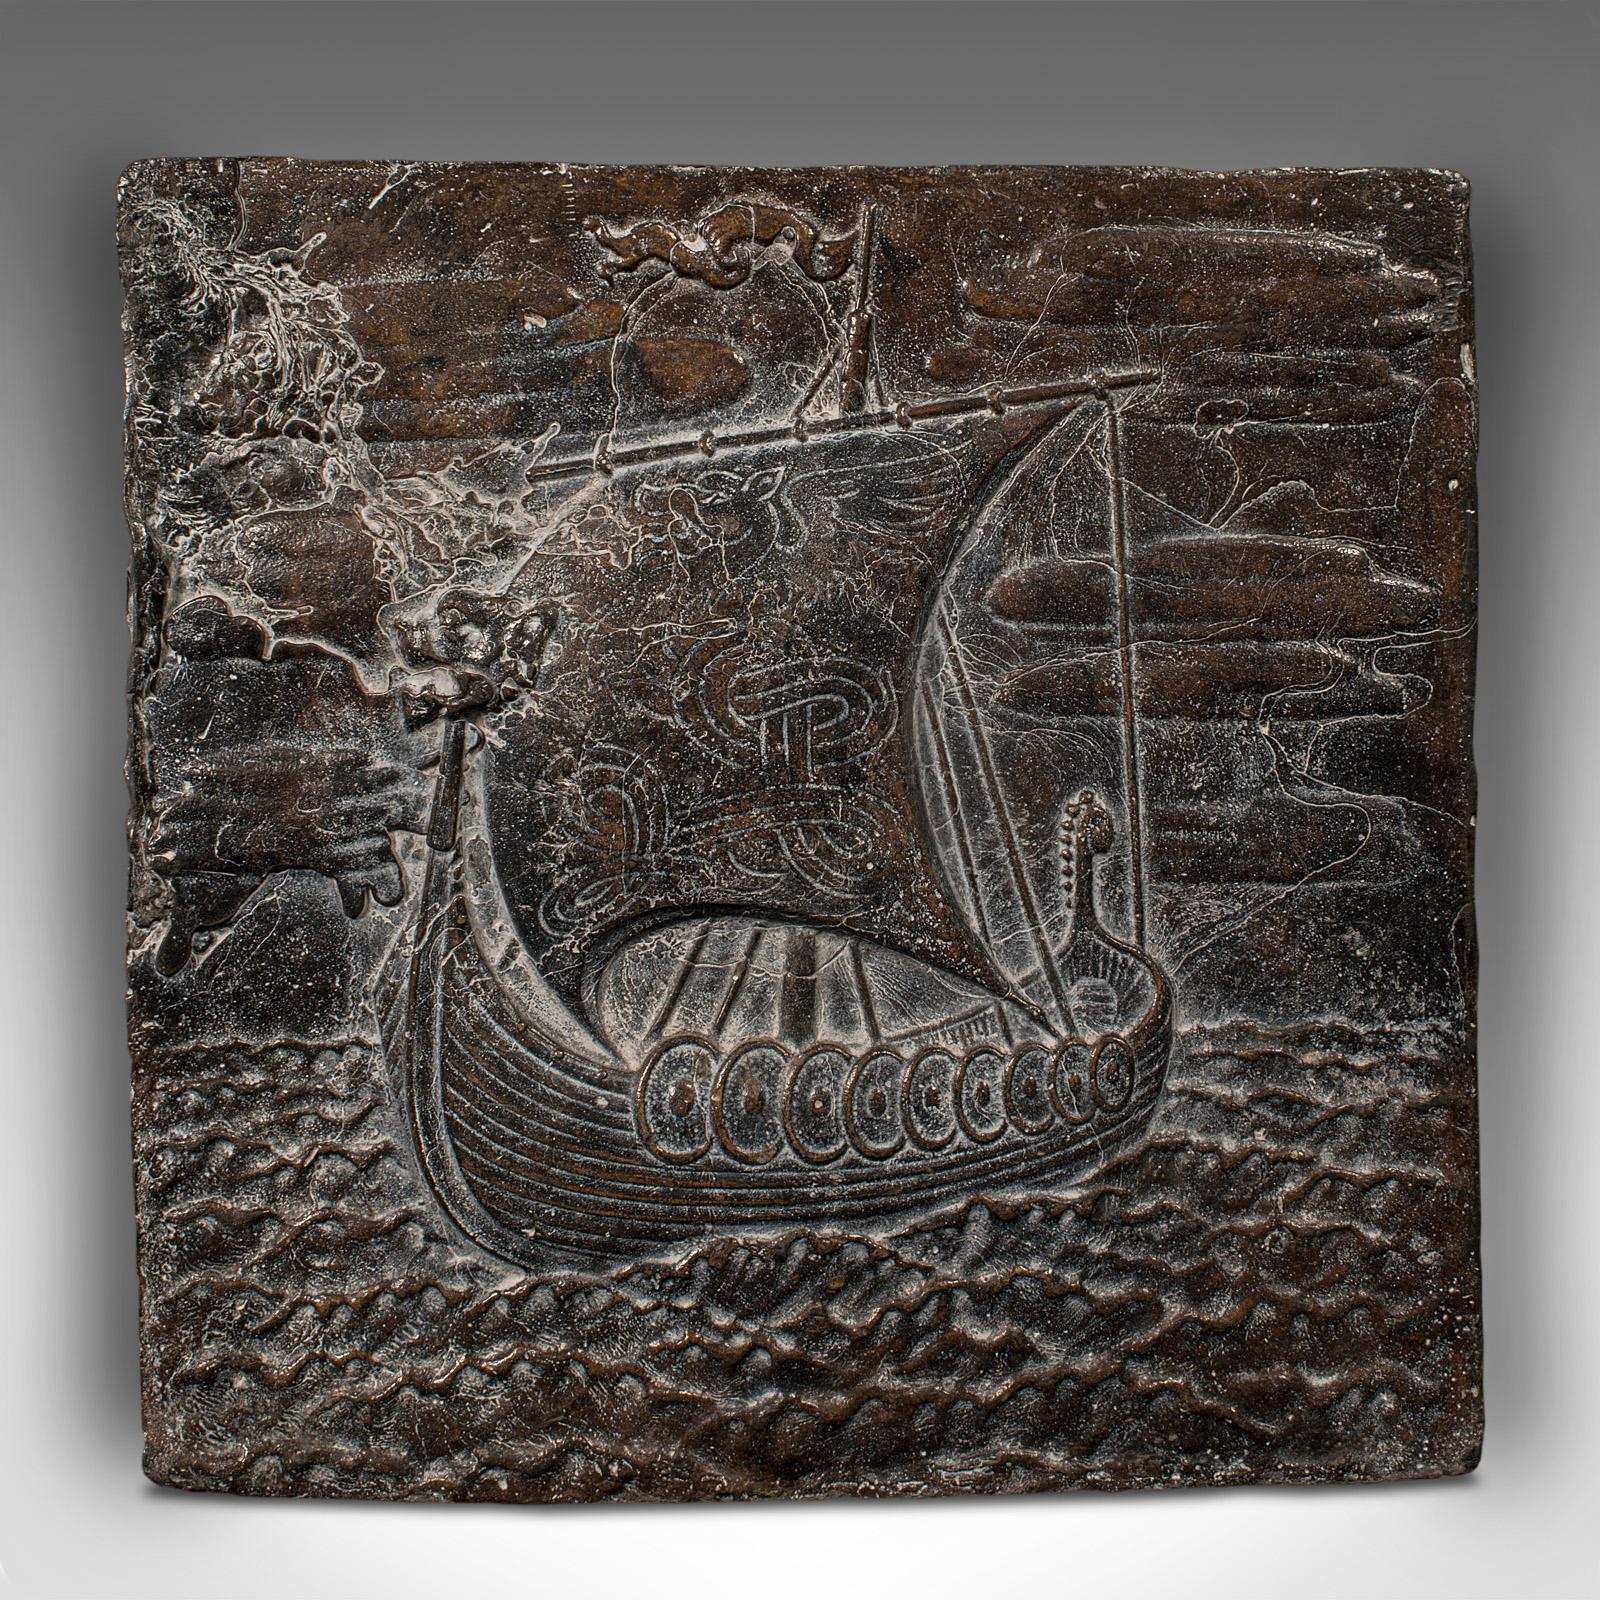 This is a heavy antique decorative lead plaque. A Scandinavian, relief panel with Viking long ship scene, dating to the Arts & Crafts movement of the late Victorian period, circa 1900.

Fascinating lead panel, with superb decorative